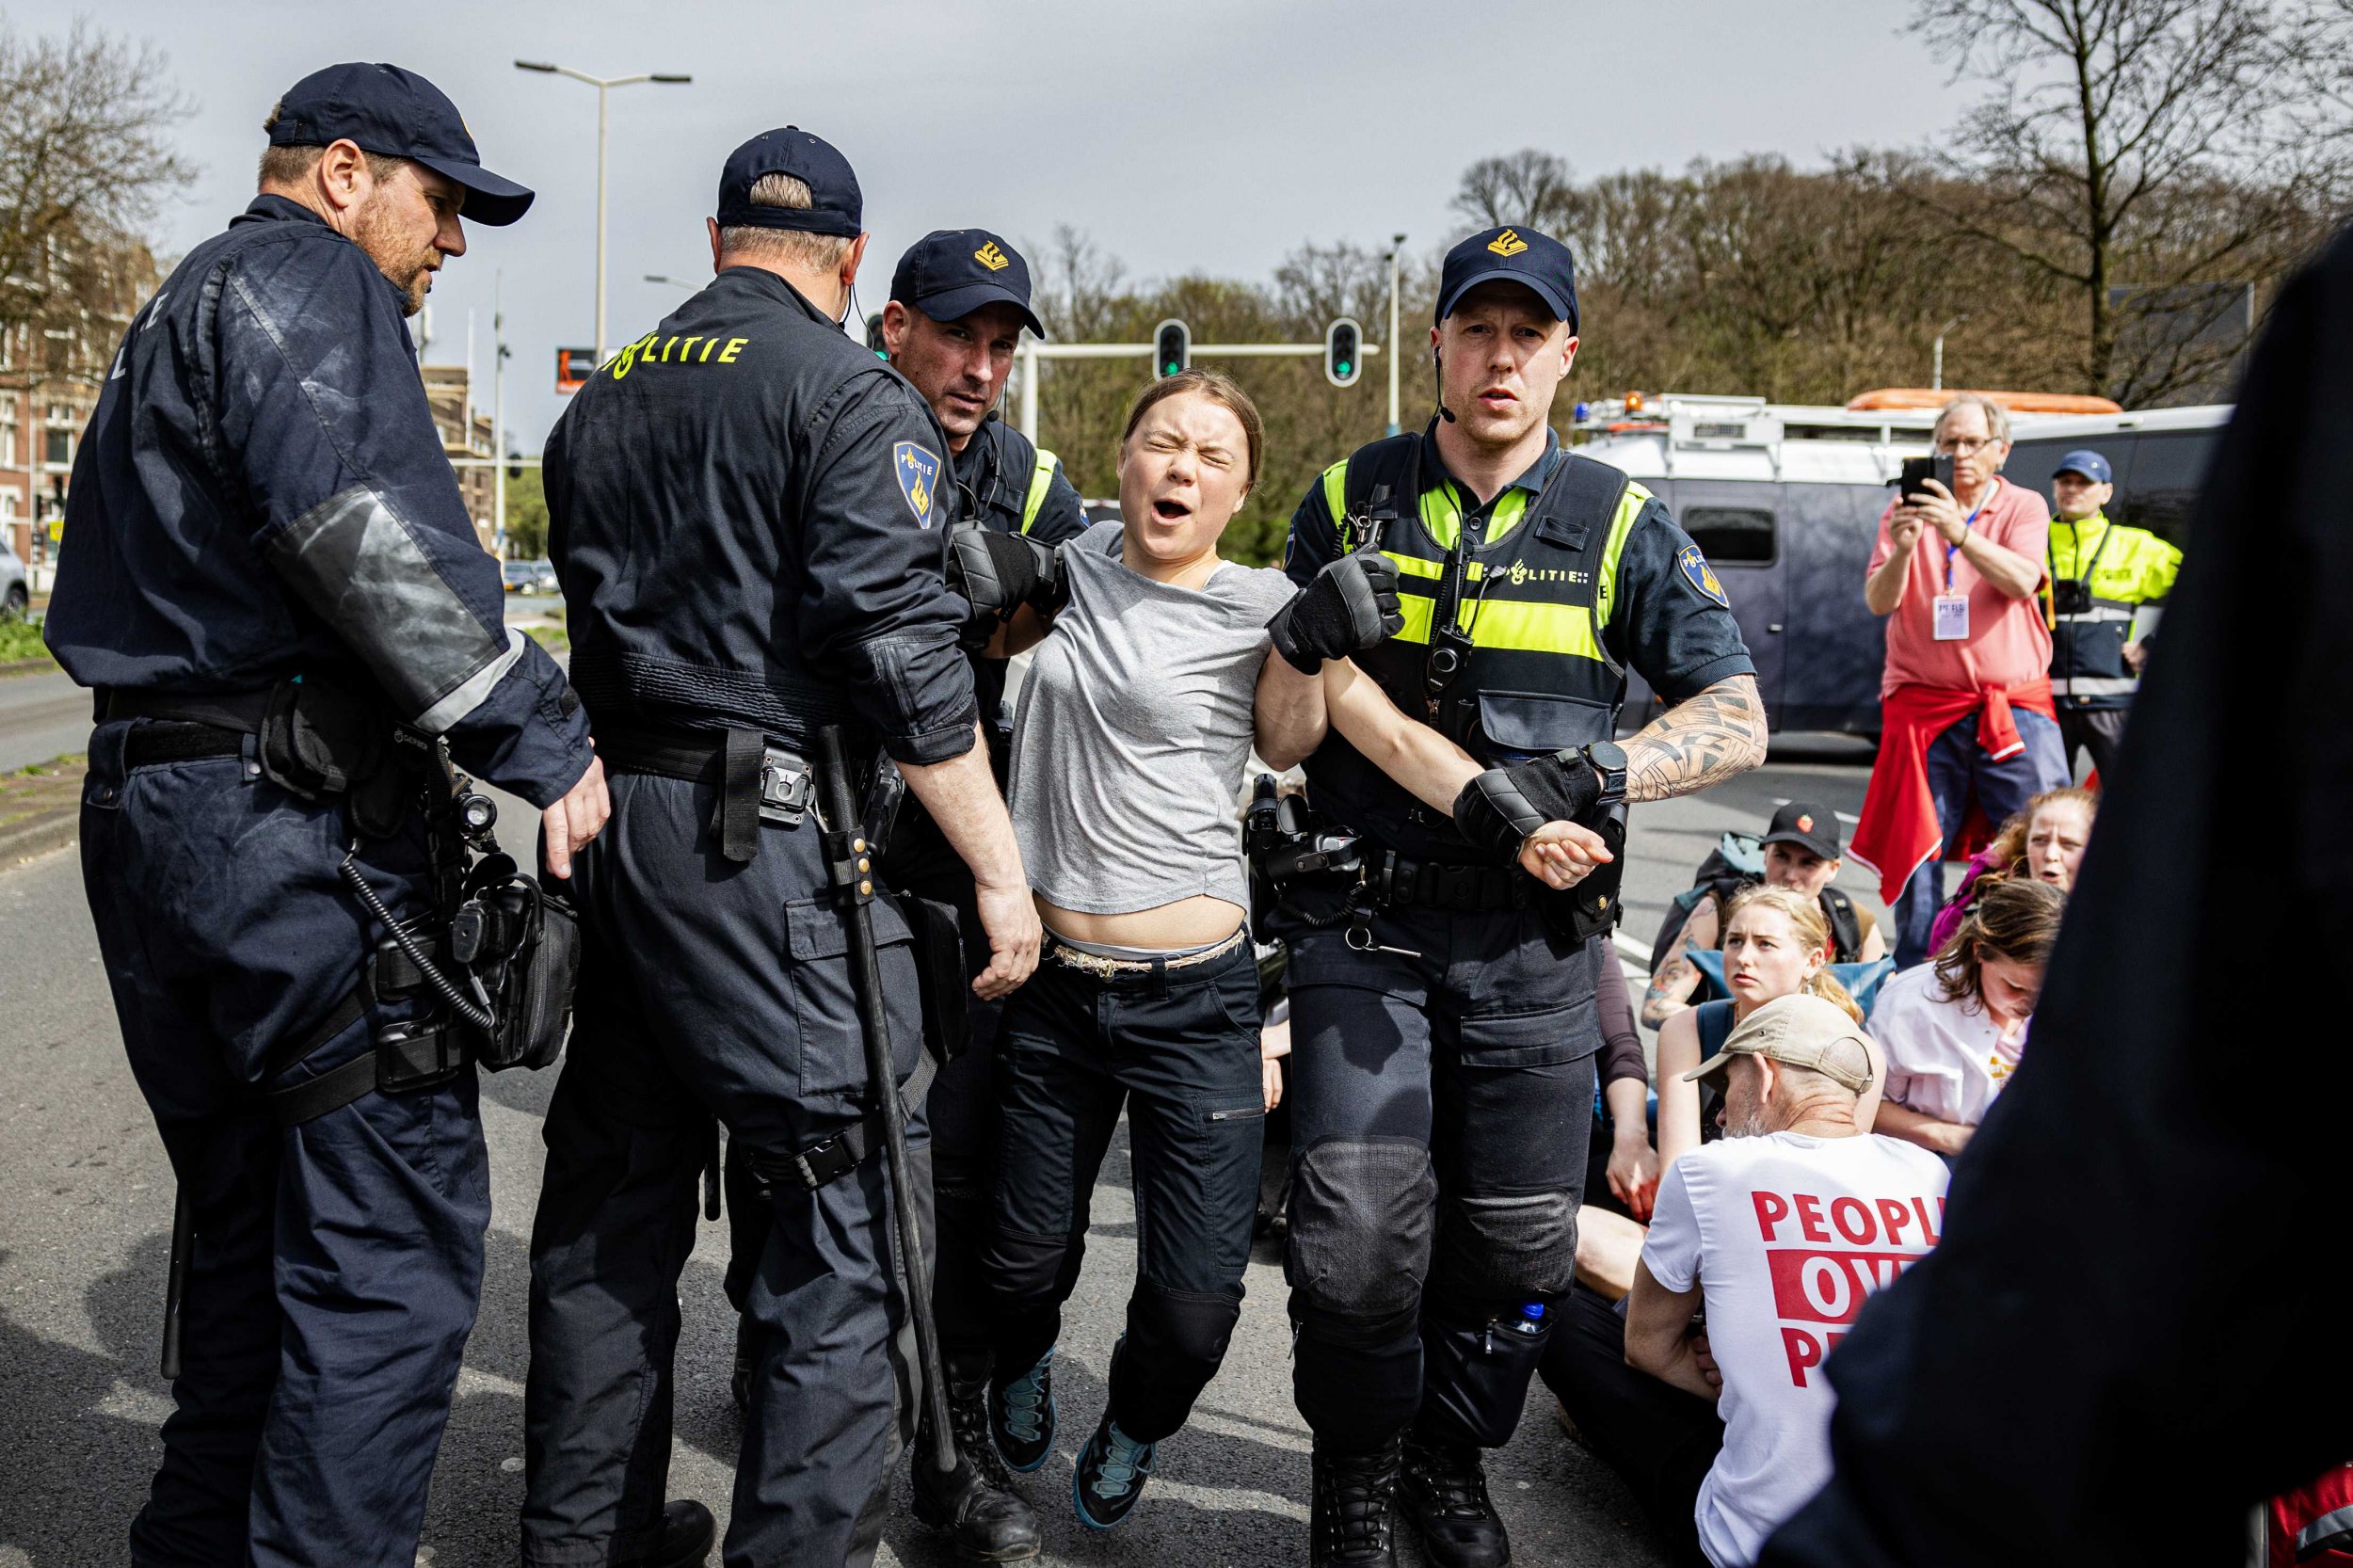 Greta Thunberg dragged away from climate protest by police